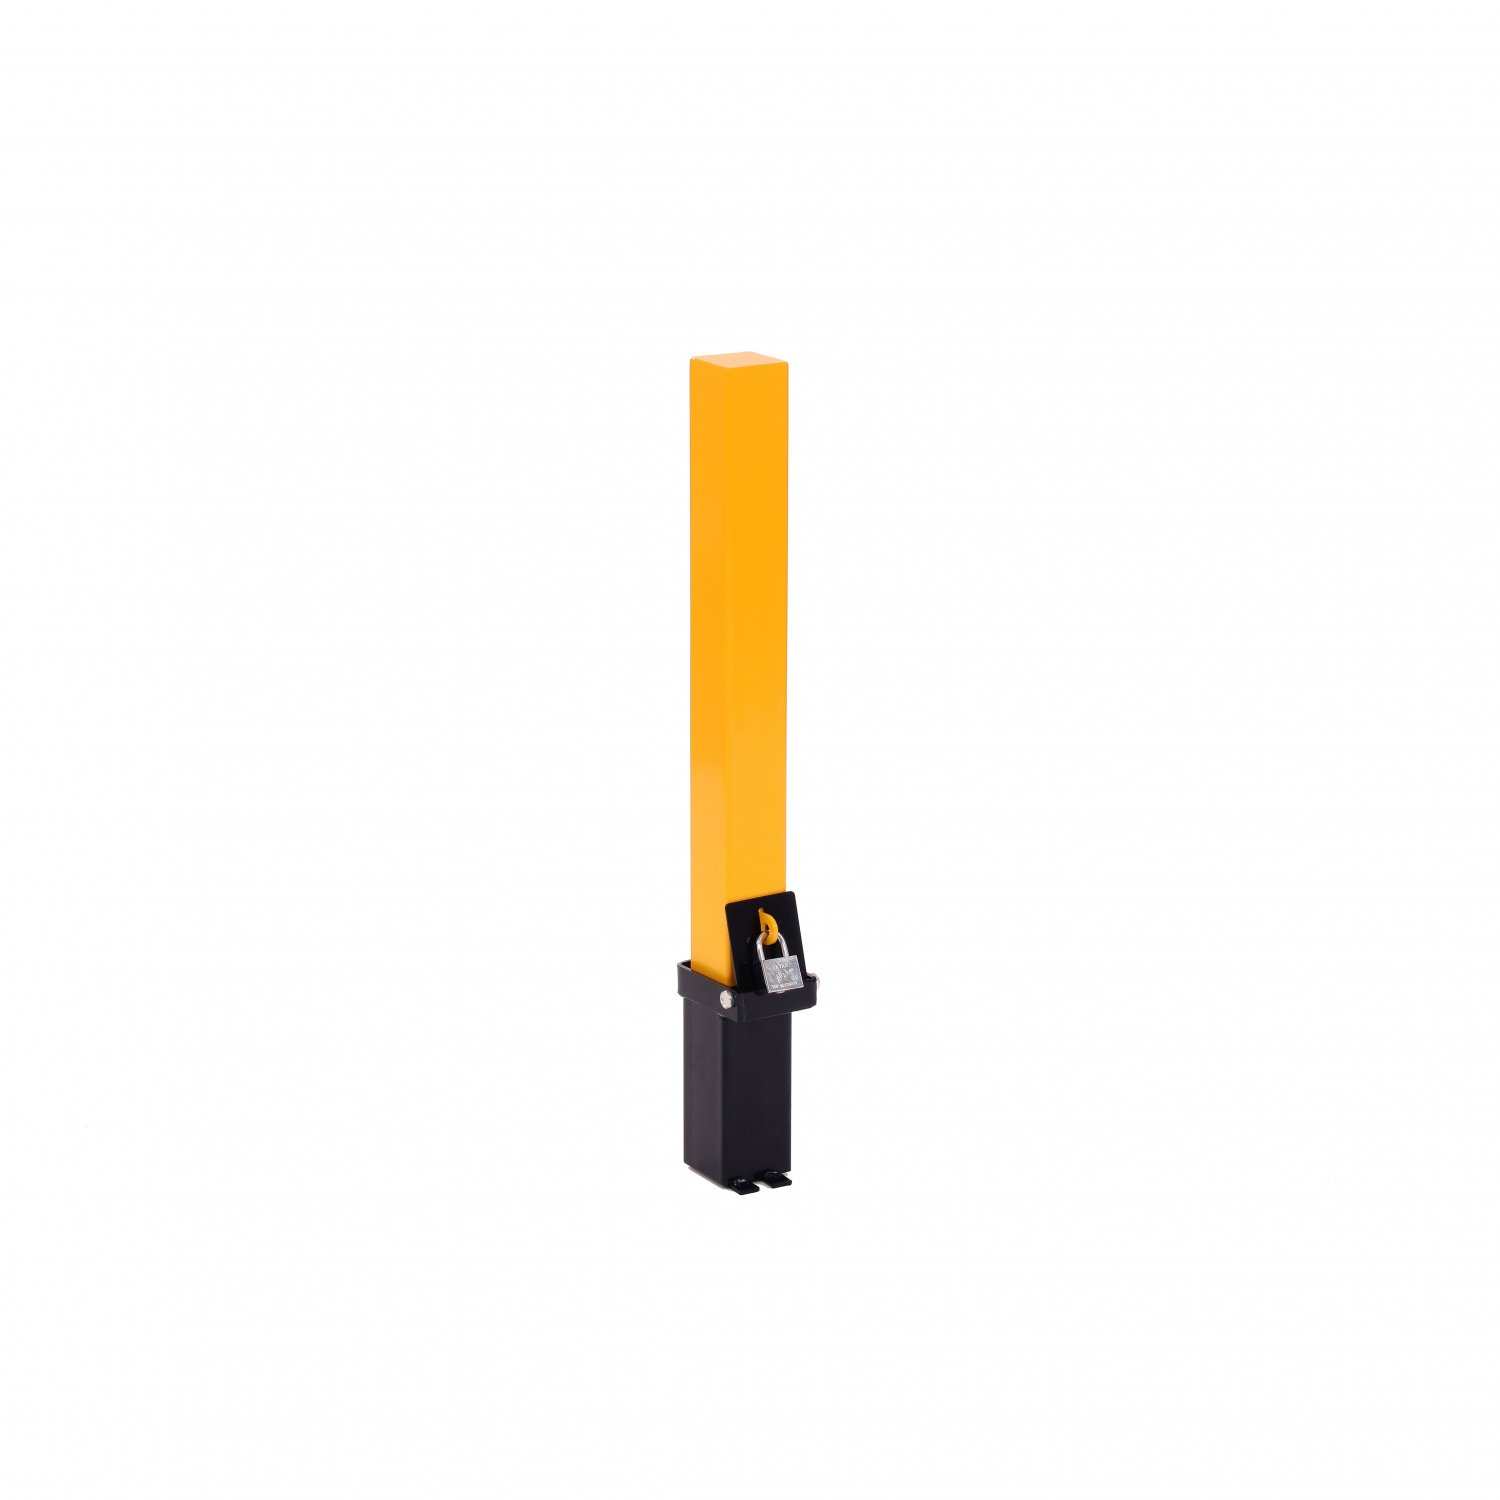 Removable Locking Security Post Parking Space Bollard Barrier